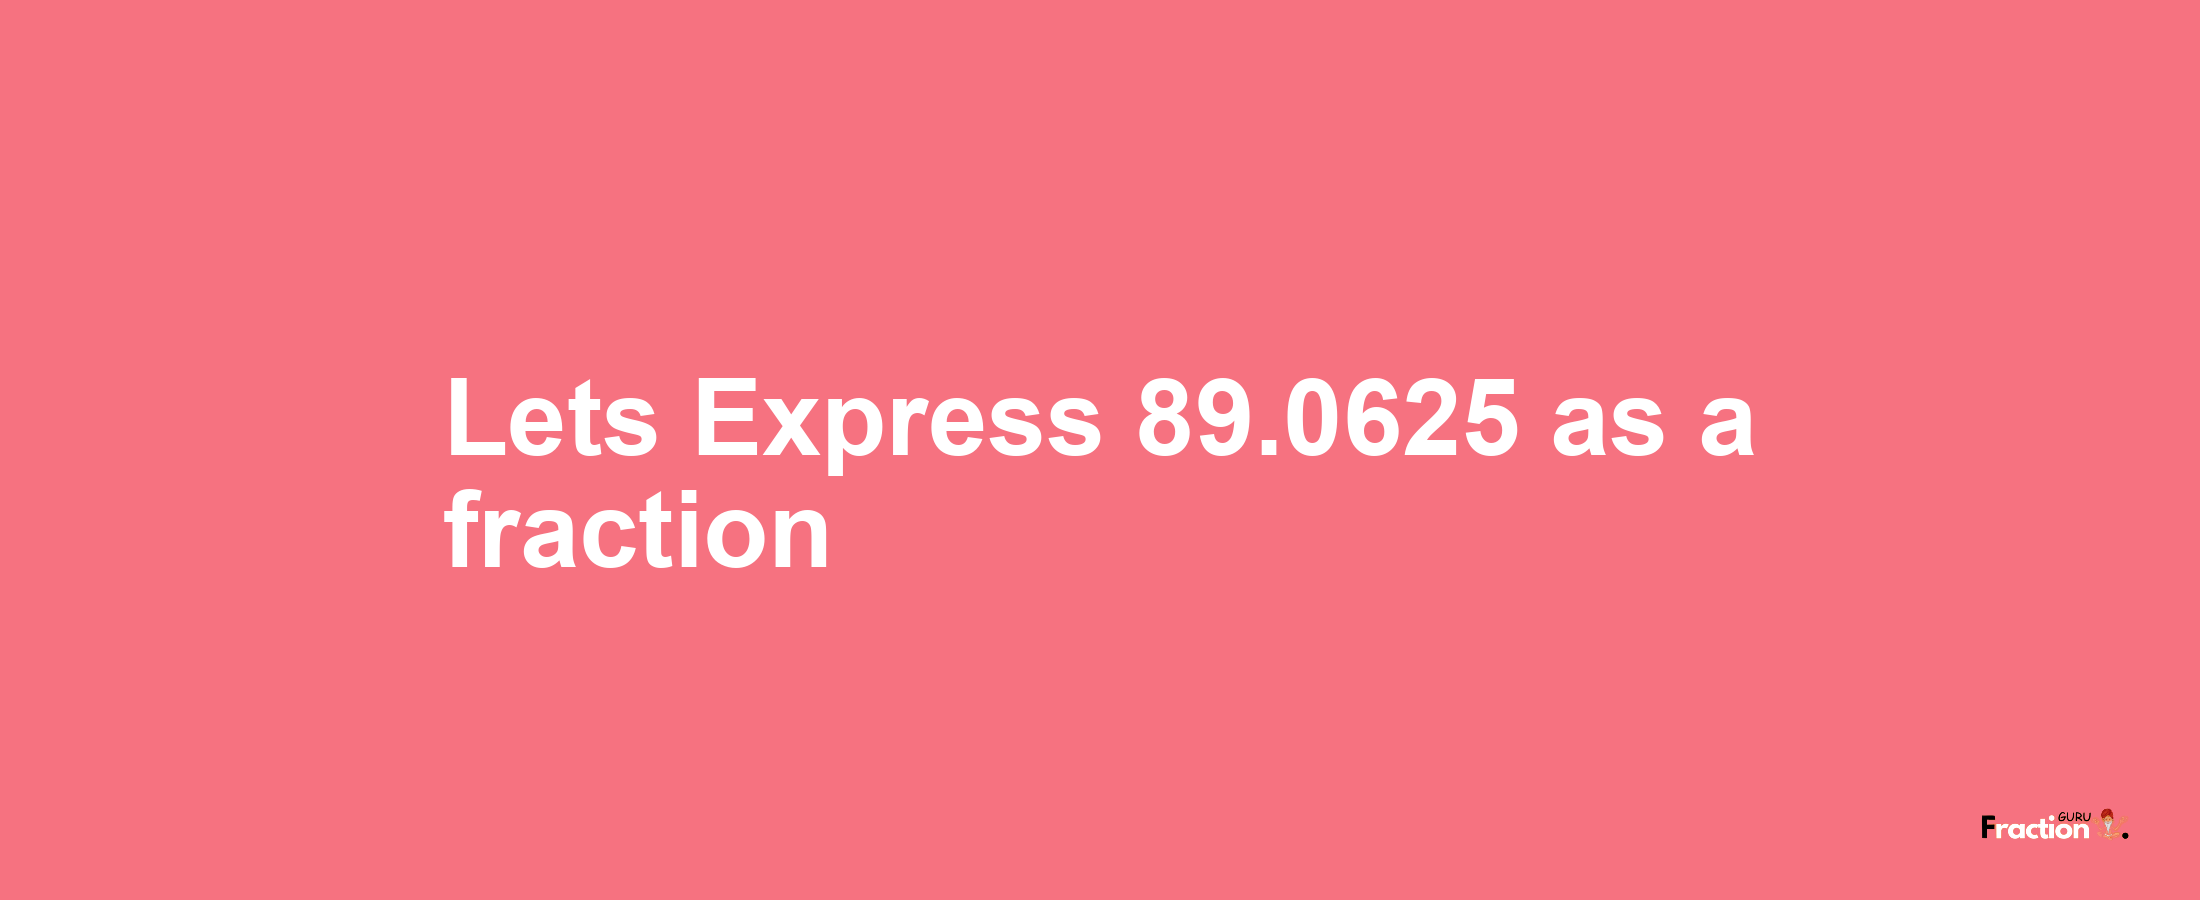 Lets Express 89.0625 as afraction